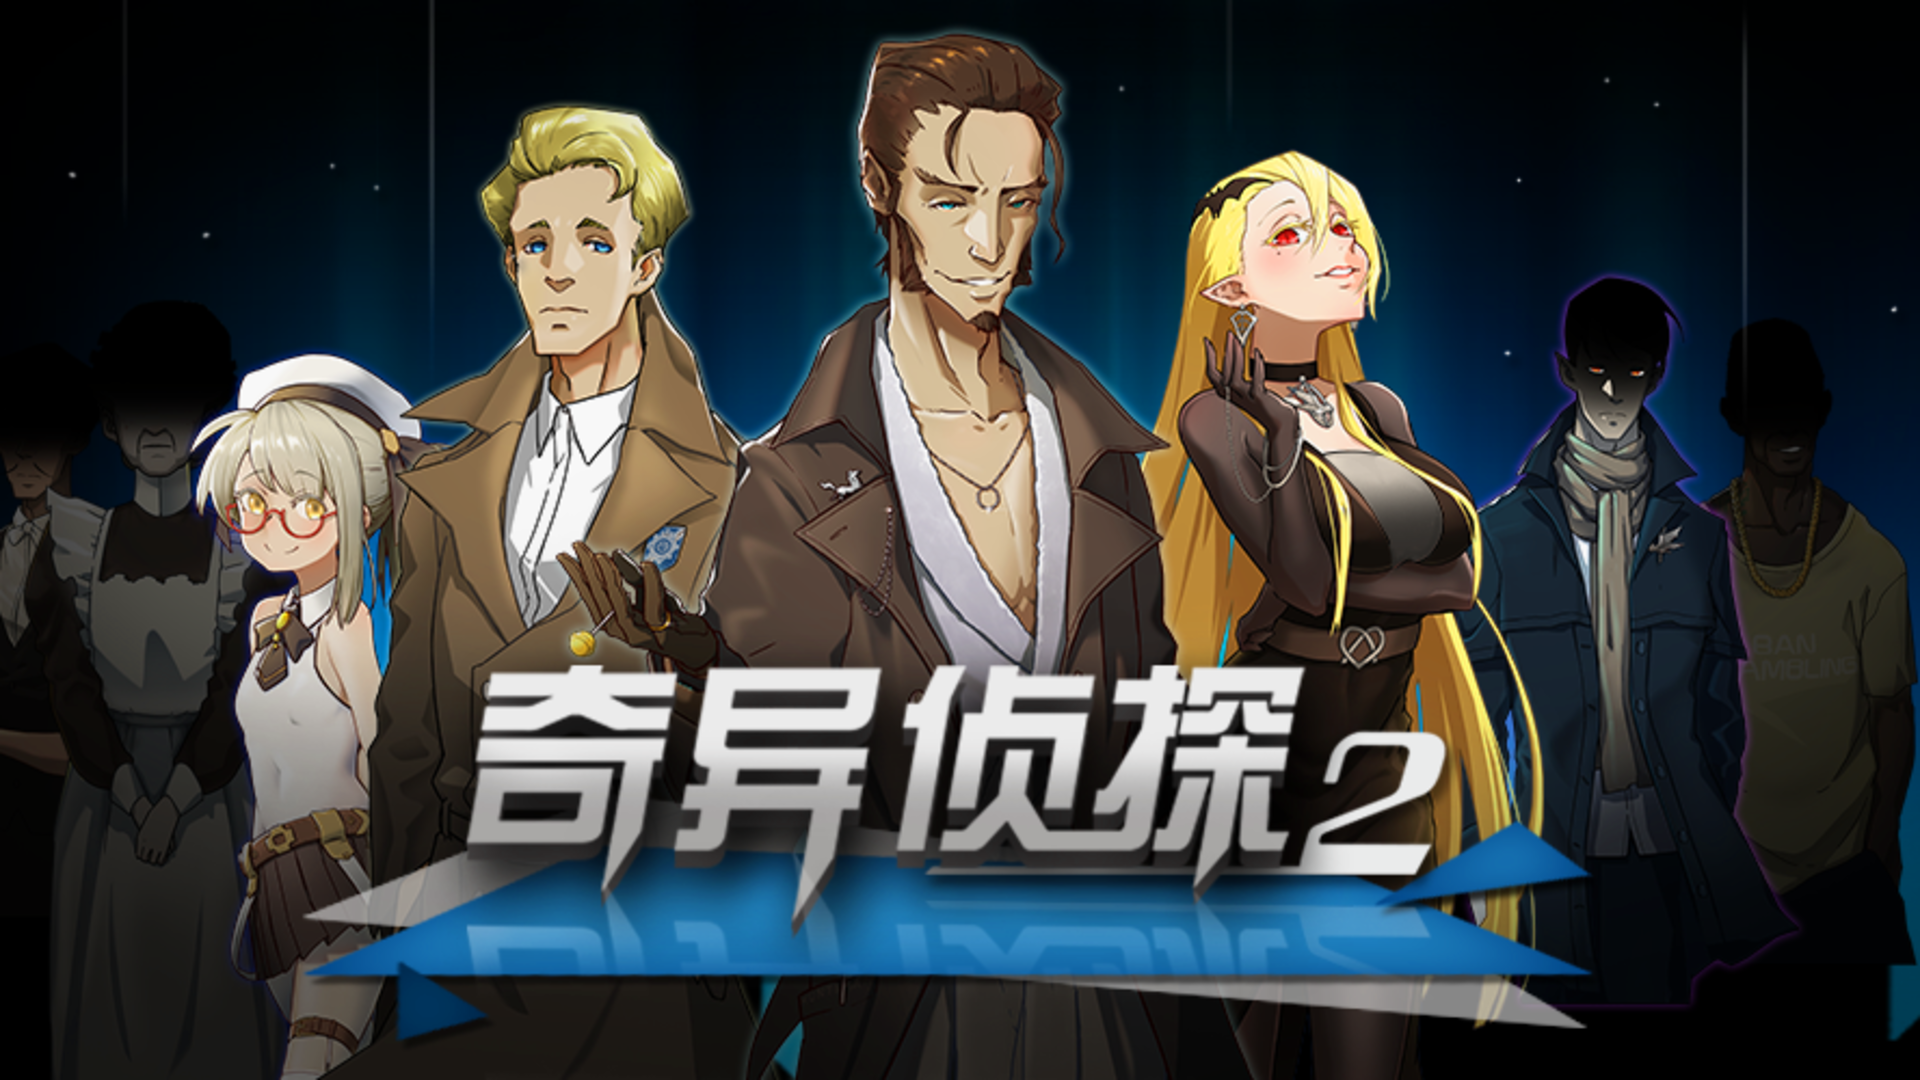 Banner of Extraño detective 2 